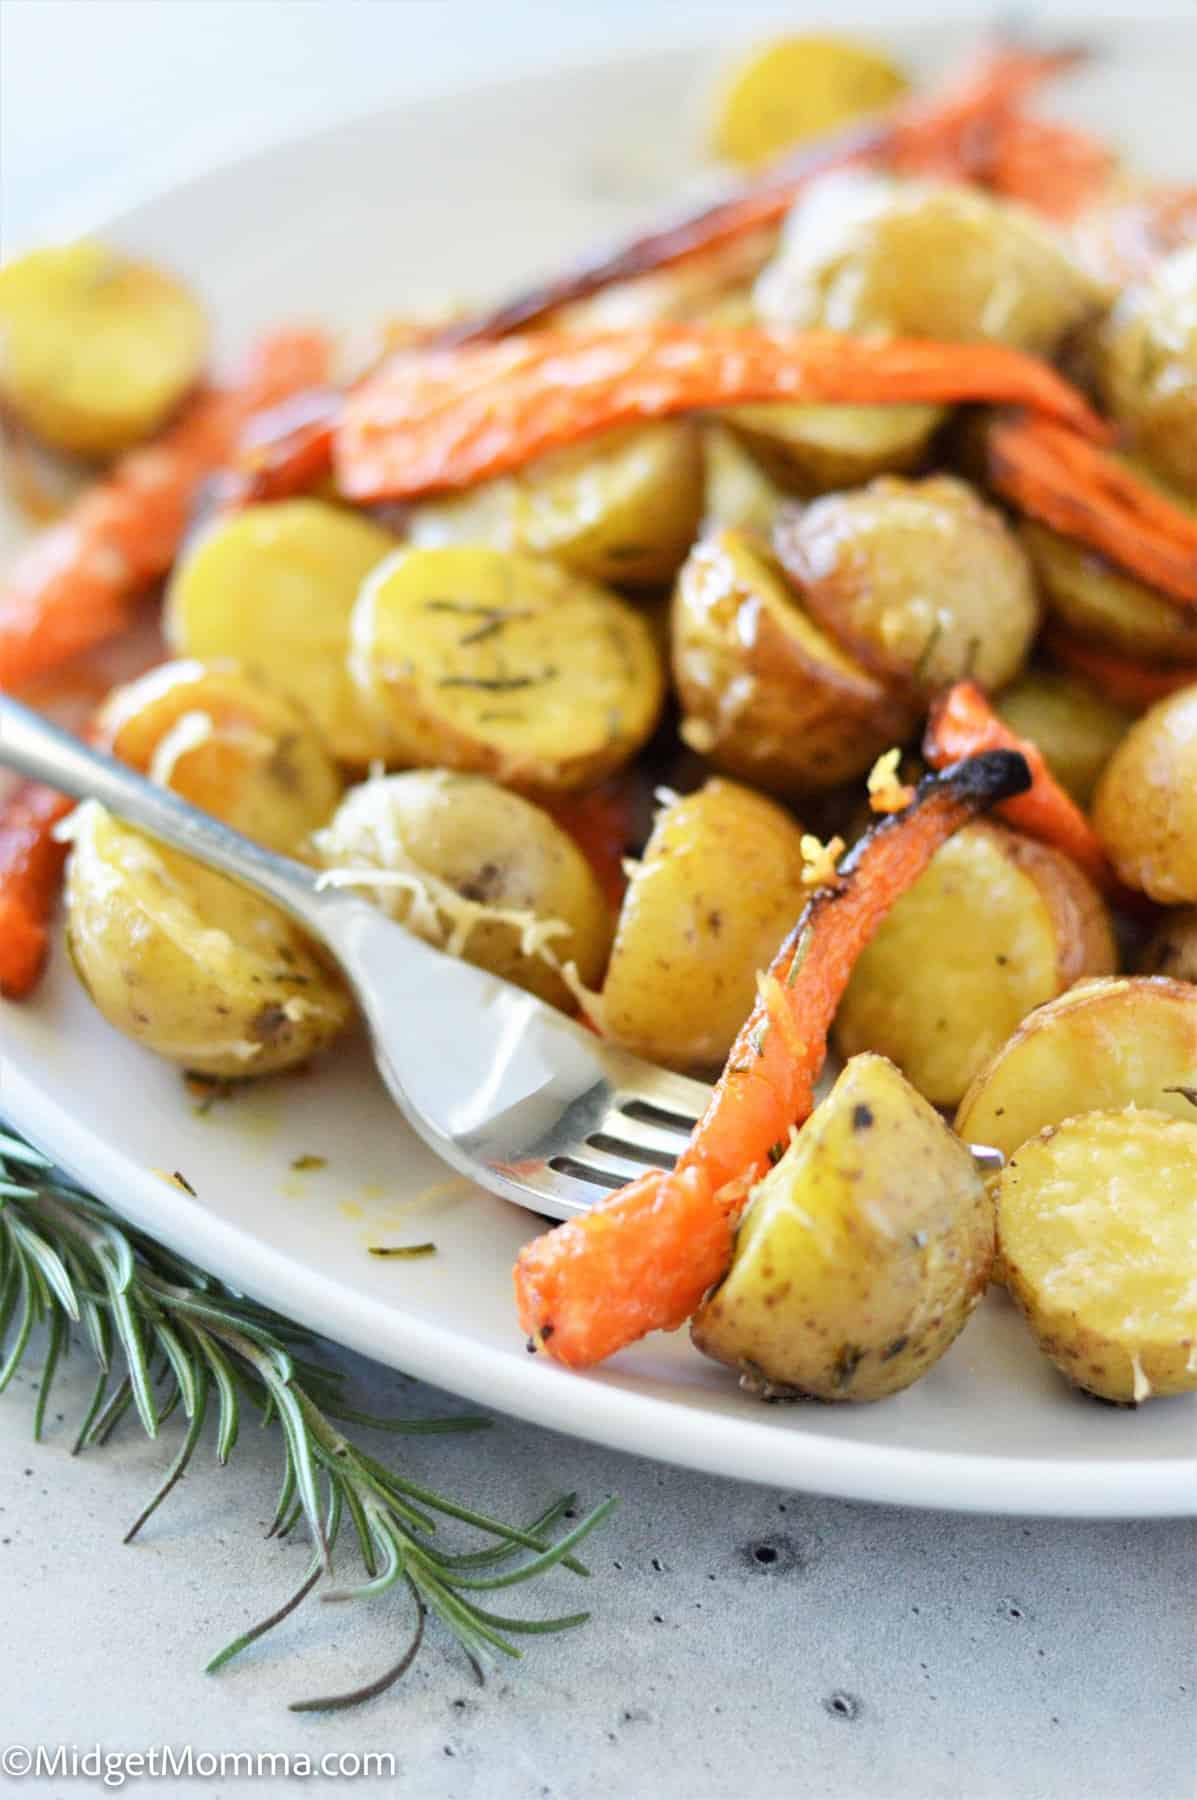 Roasted Rosemary Parmesan Roasted Carrots and Potatoes